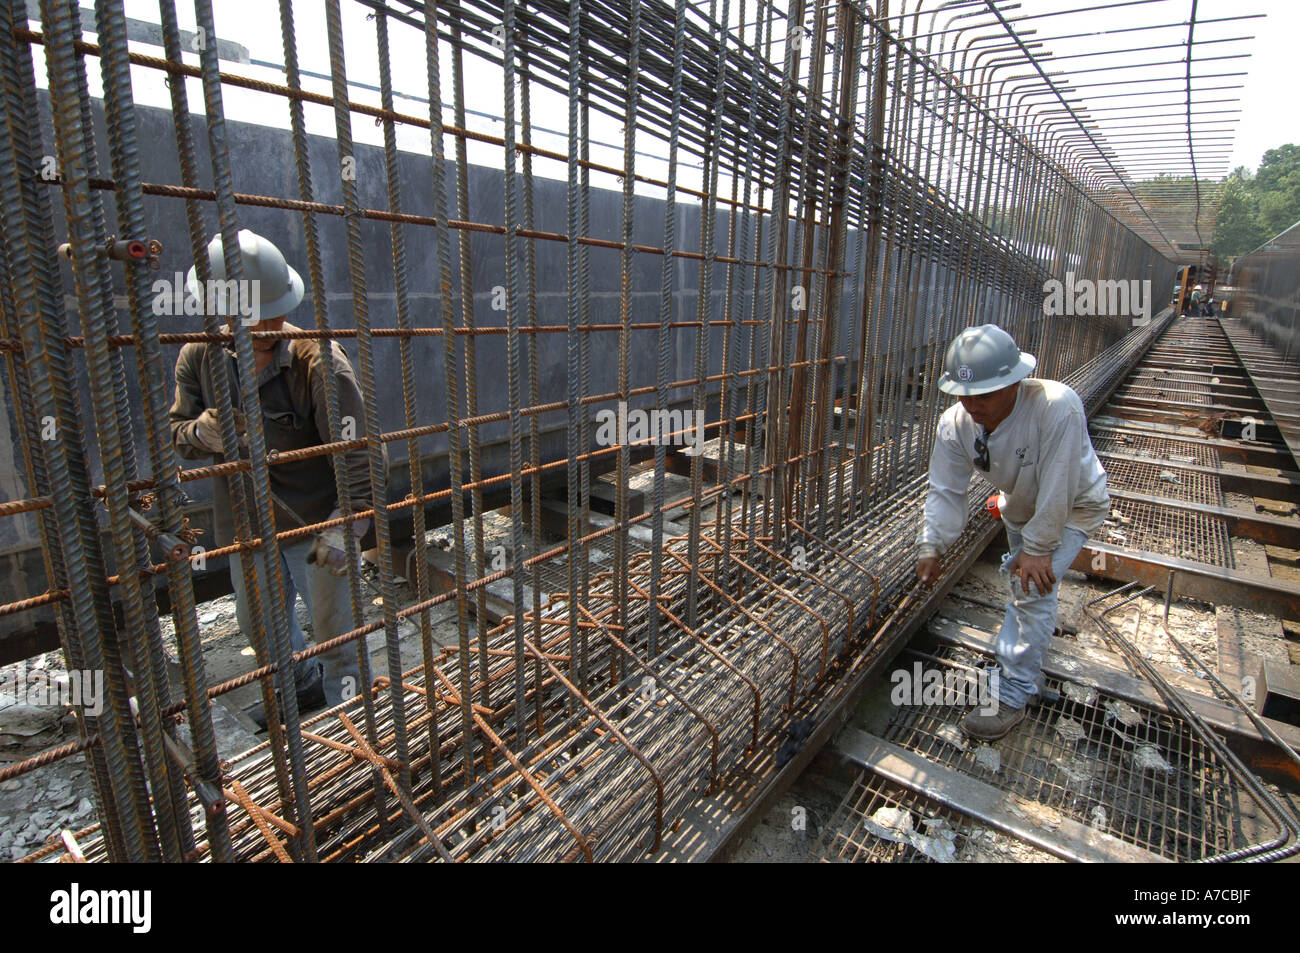 Hispanic workers inspect rebar before large pre stressed concrete girders are poured for new Atlanta airport 2005 Robin Nelson M Stock Photo